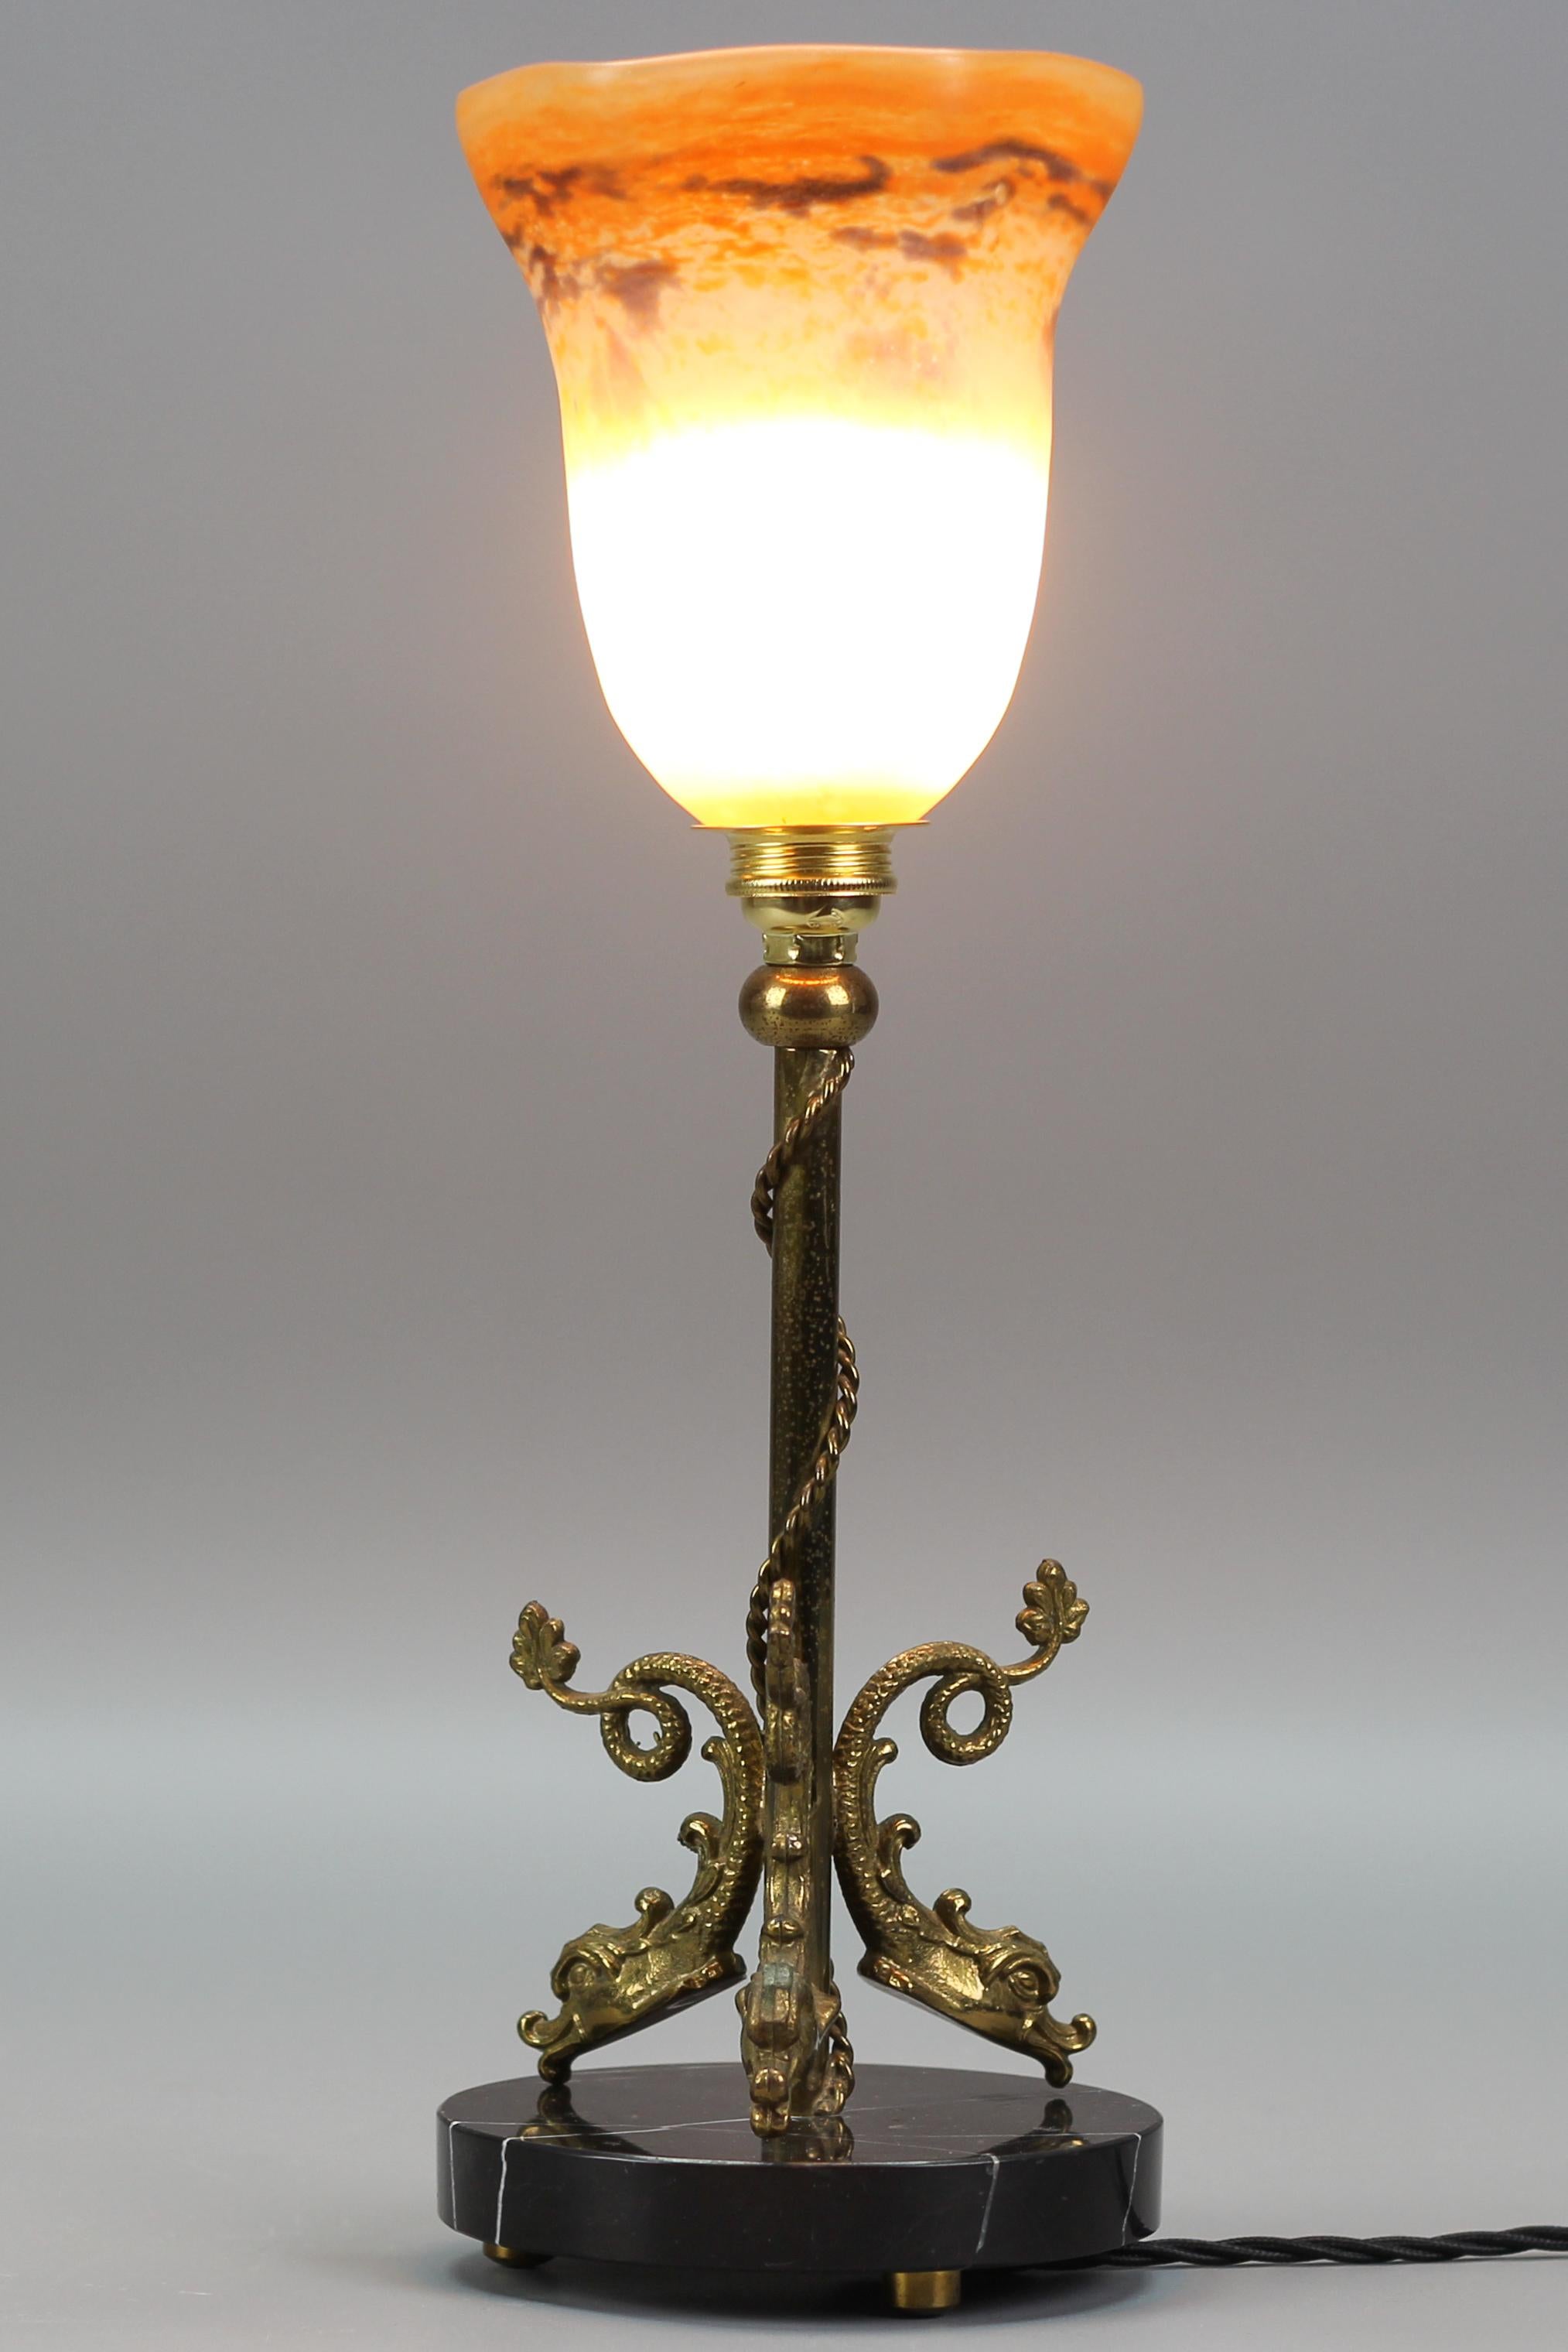 Mid-20th Century French Neoclassical Style Brass and Marble Table Lamp with Dolphins, 1950s For Sale